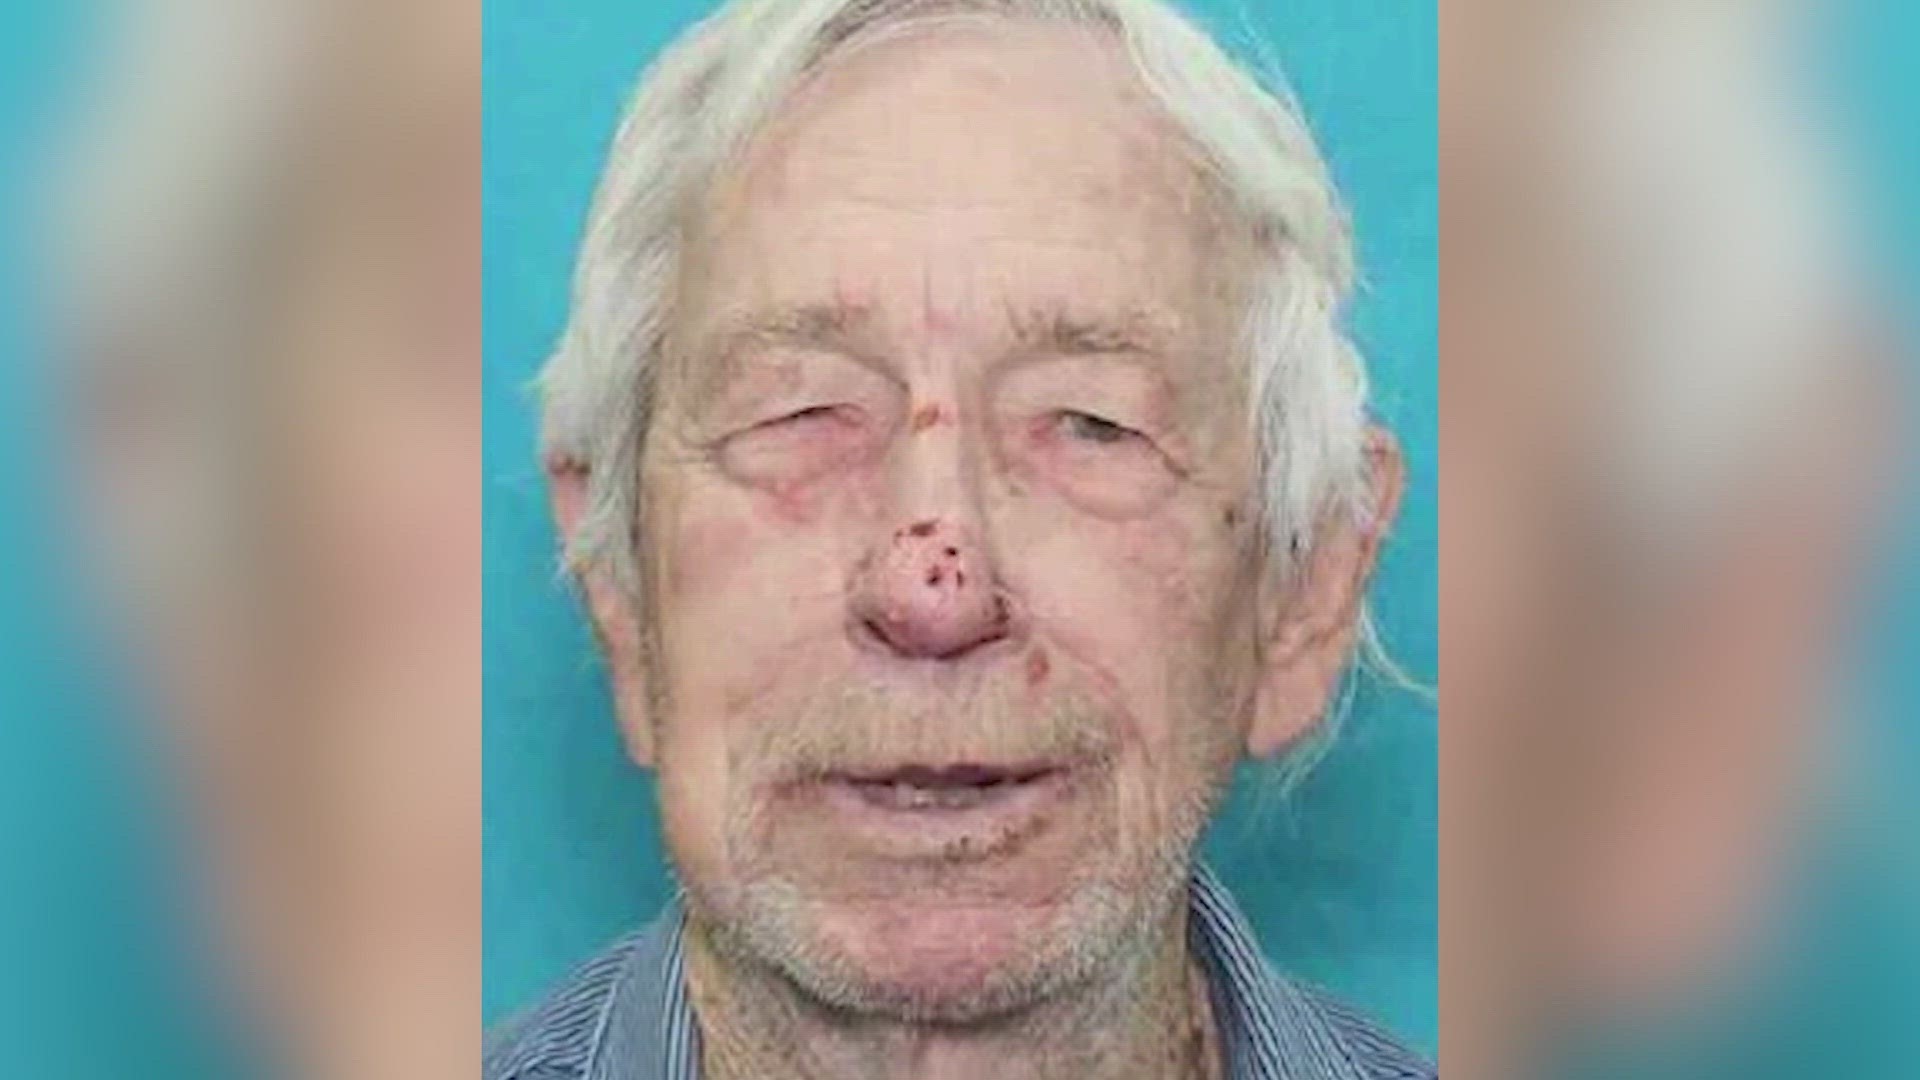 Family asks for help locating 86-year-old man who police say was taken by woman he was living with